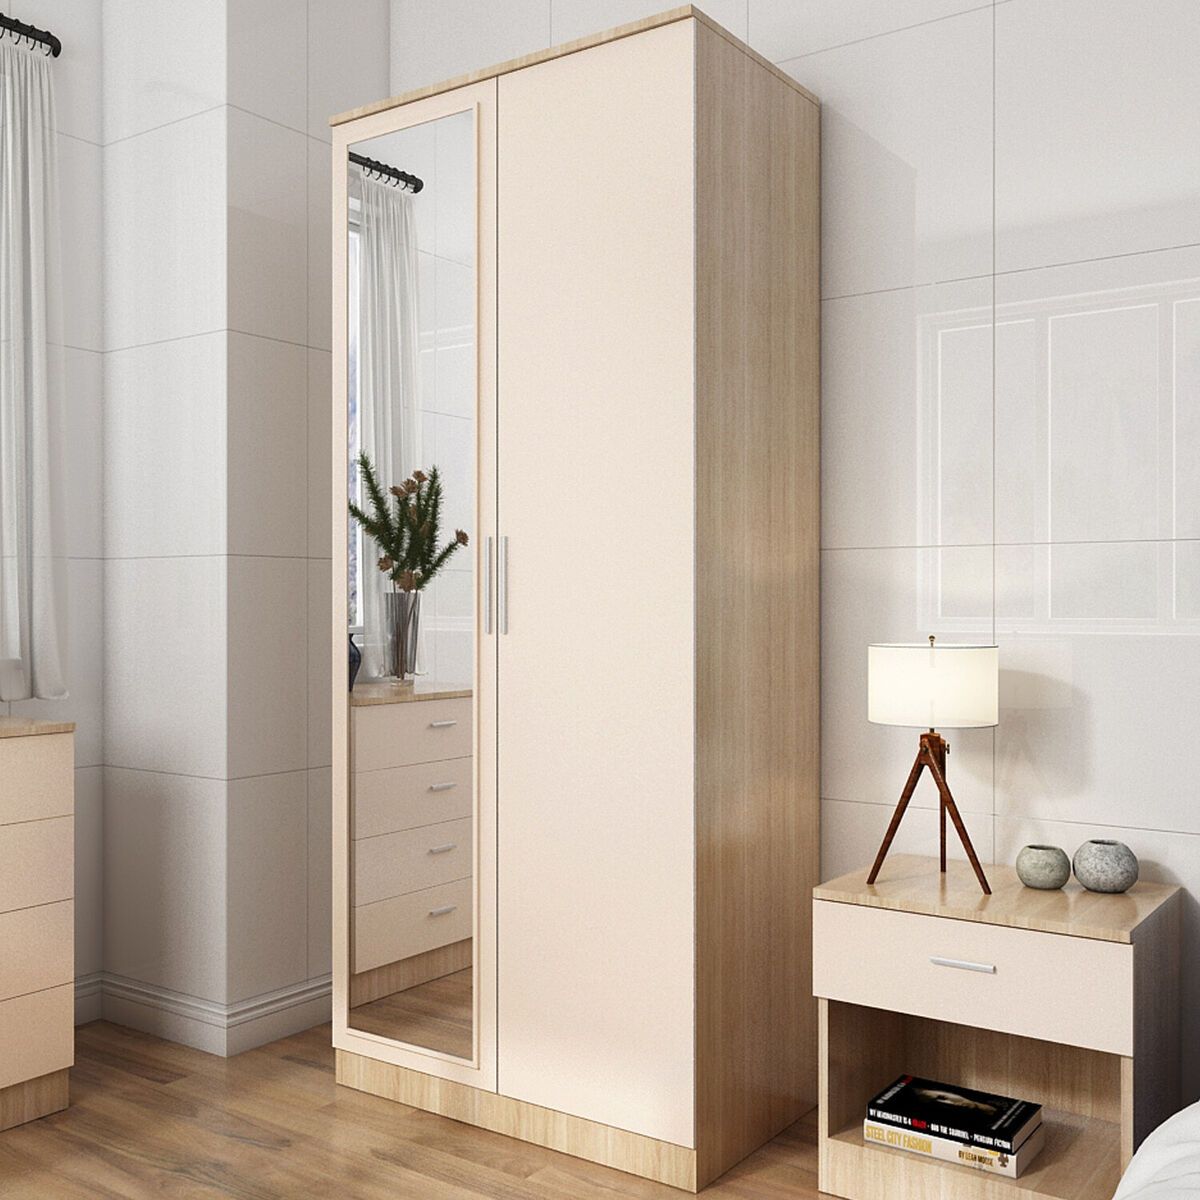 2 Door Wardrobe With Mirror High Gloss Large Storage 4 Colors Cupboard  Furniture | Ebay With 4 Door Wardrobes With Mirror And Drawers (View 14 of 15)